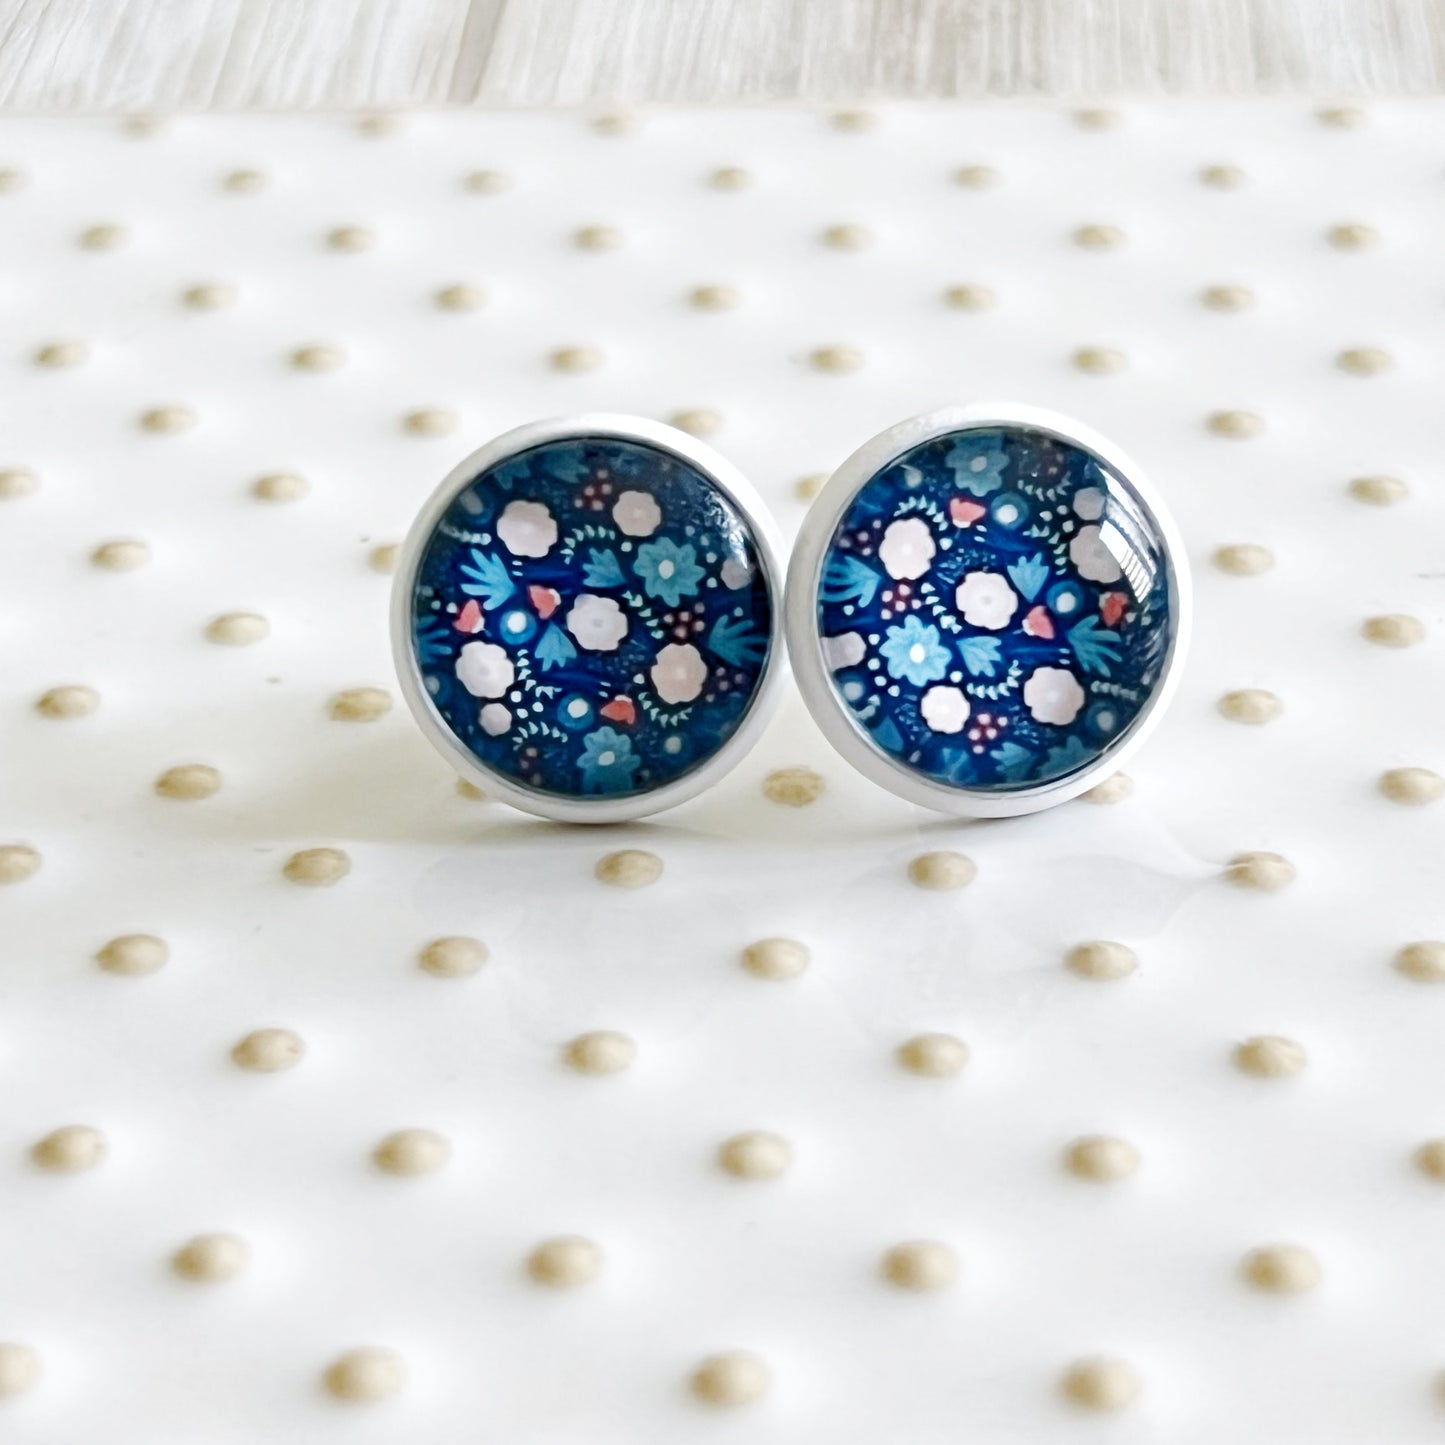 Blue & White Wildflower Stud Earrings - Delicate & Charming Accessories